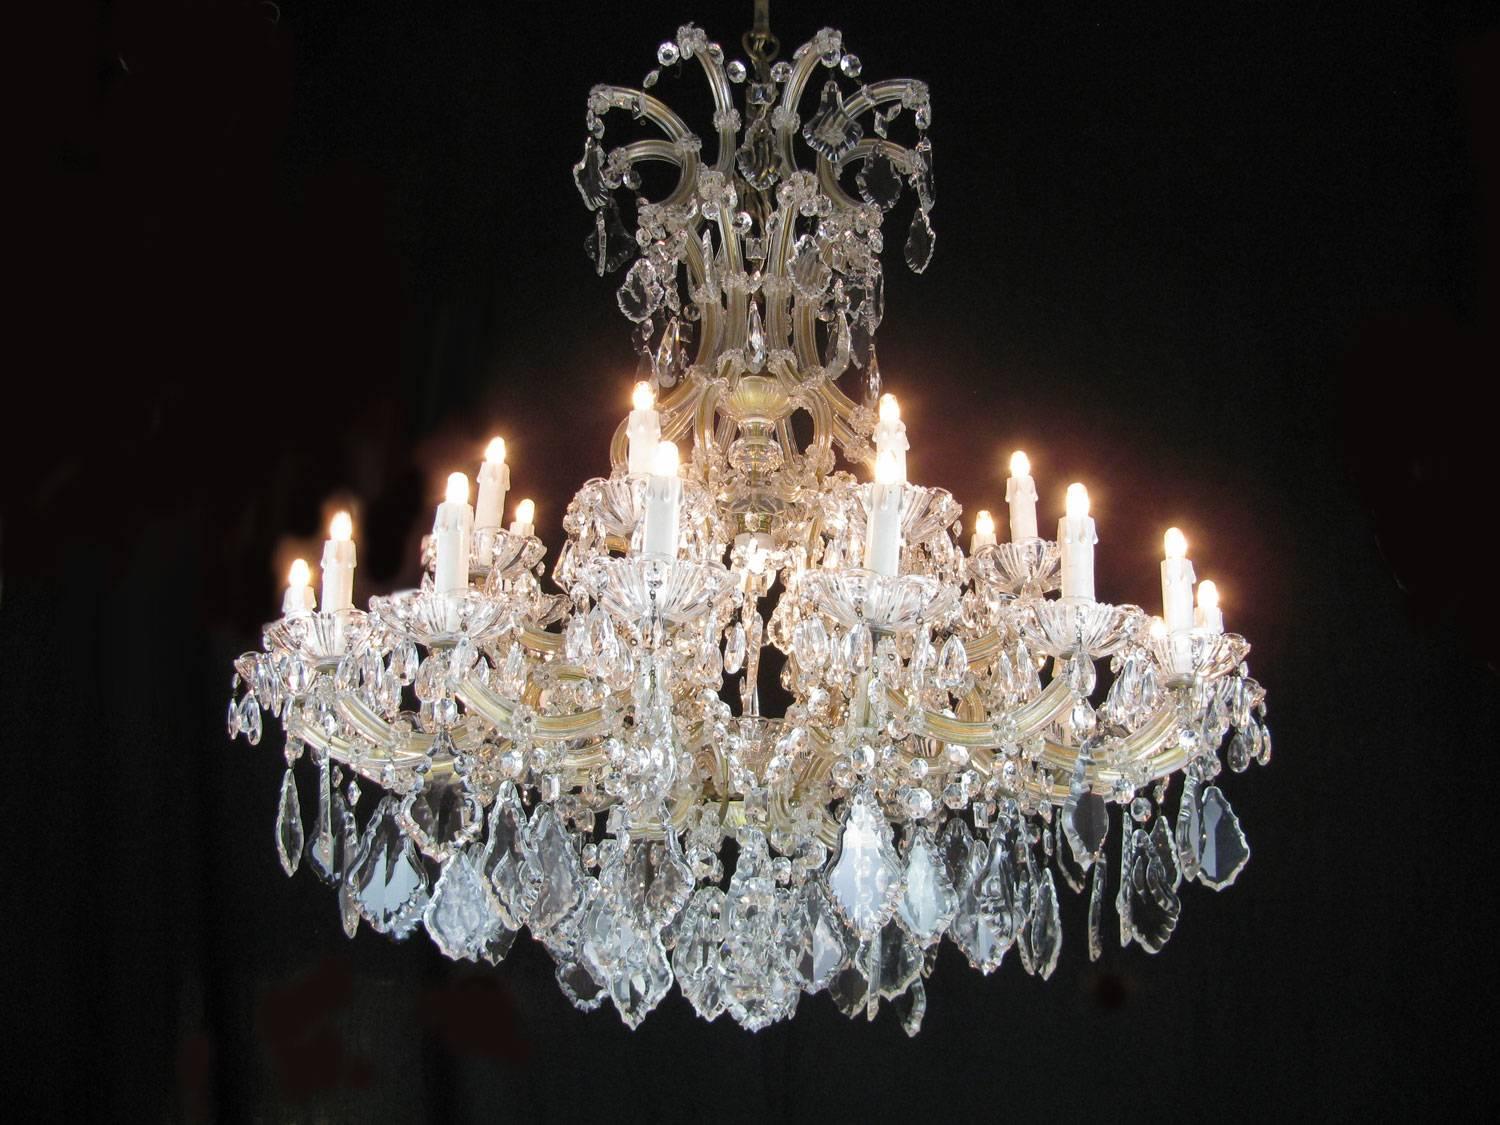 A large Italian Maria Theresa style cut-glass twenty four-light chandelier dating back to 1950s. This lovely extra-large chandelier (or hanging fixture) of crystal, glass and gilt metal featuring 16 serpentine arms, the arms alternating between one